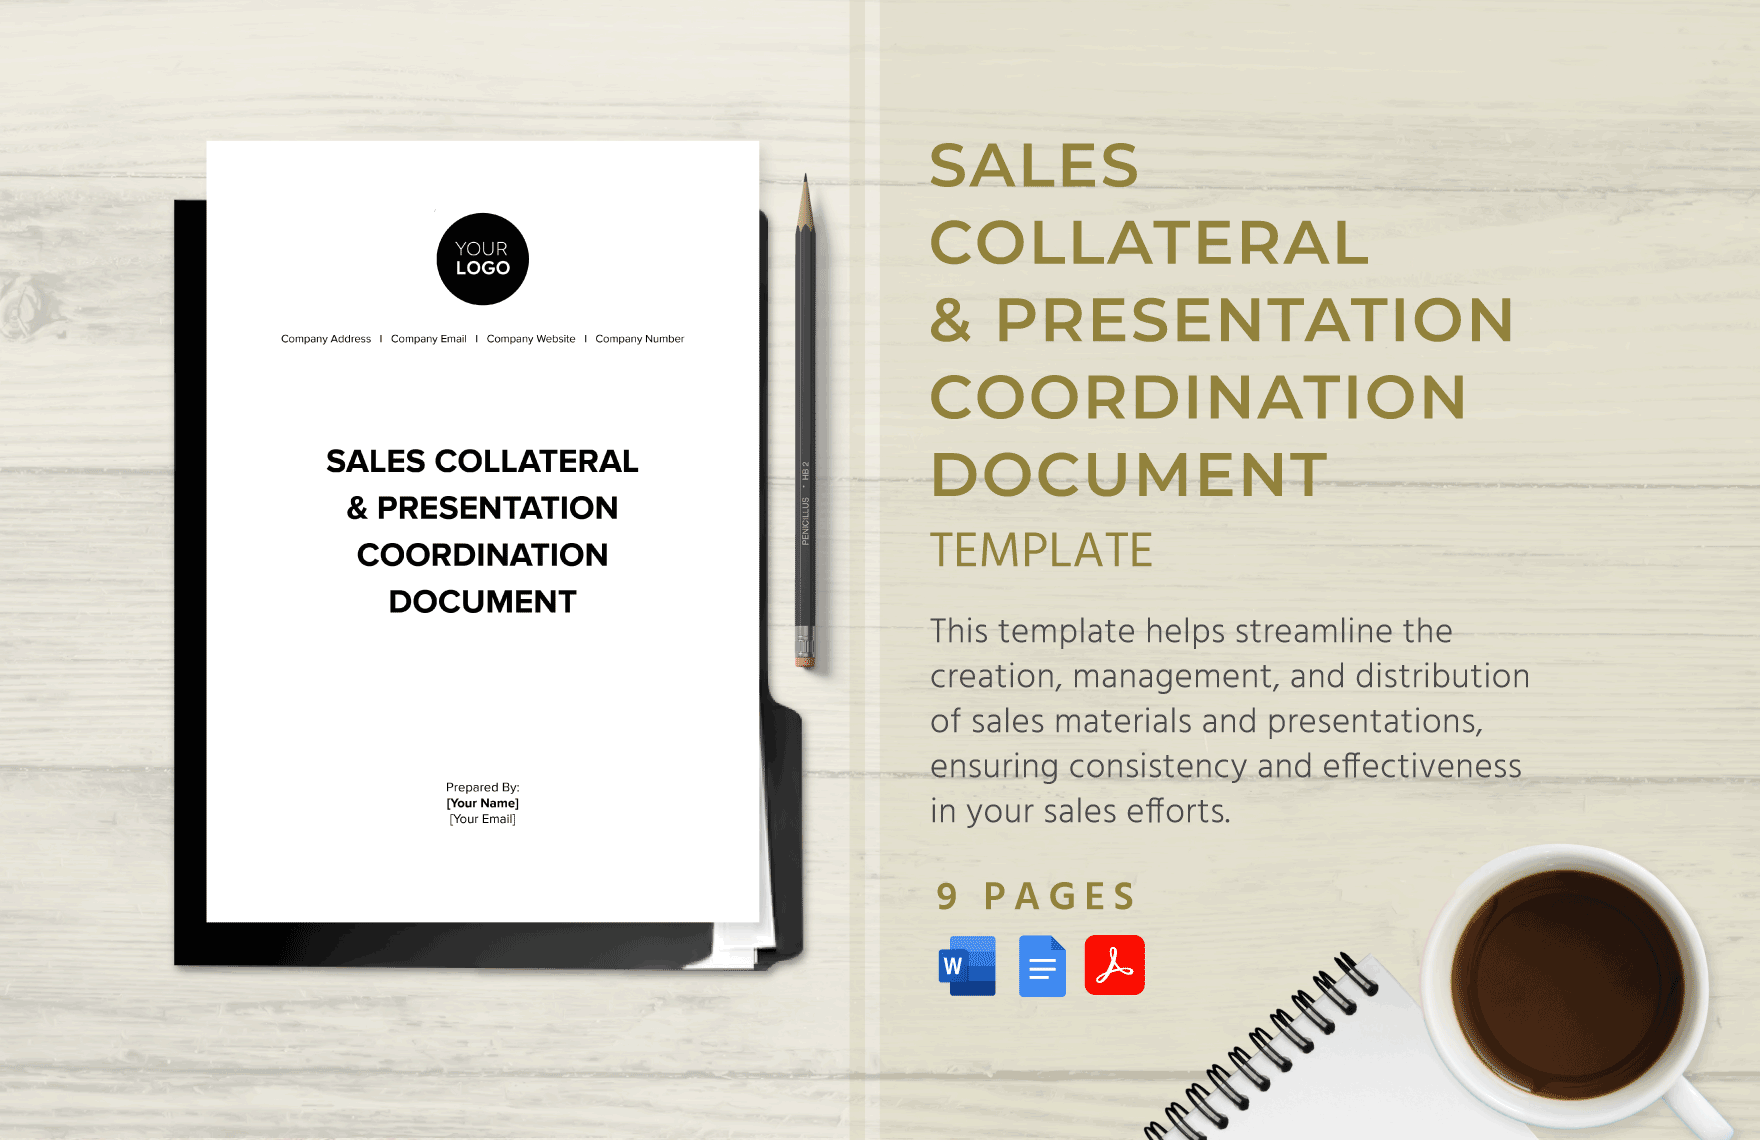 Sales Collateral & Presentation Coordination Document Template